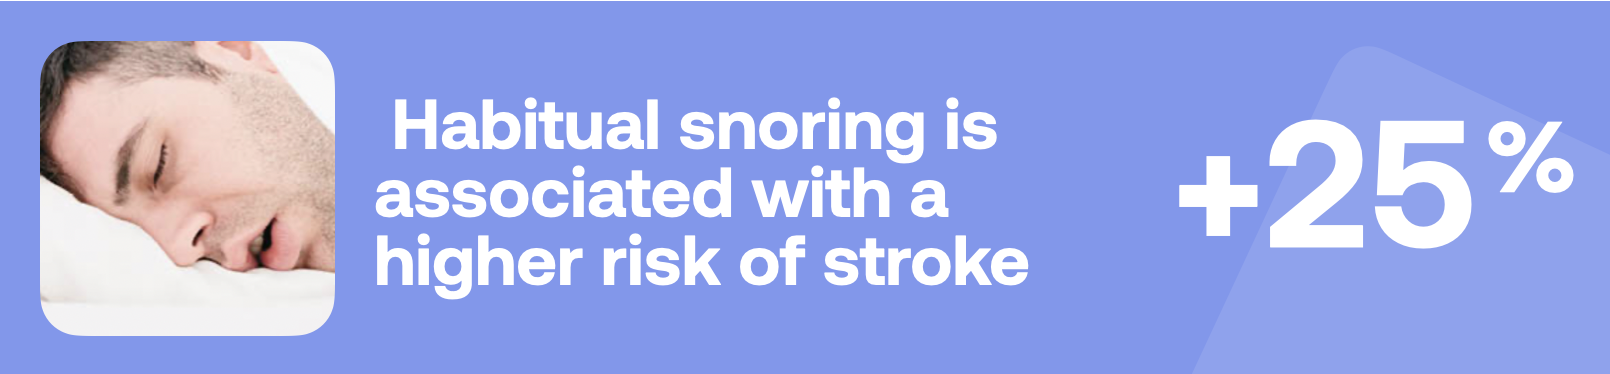 Habitual snoring is associated with a higher risk of stroke +25%